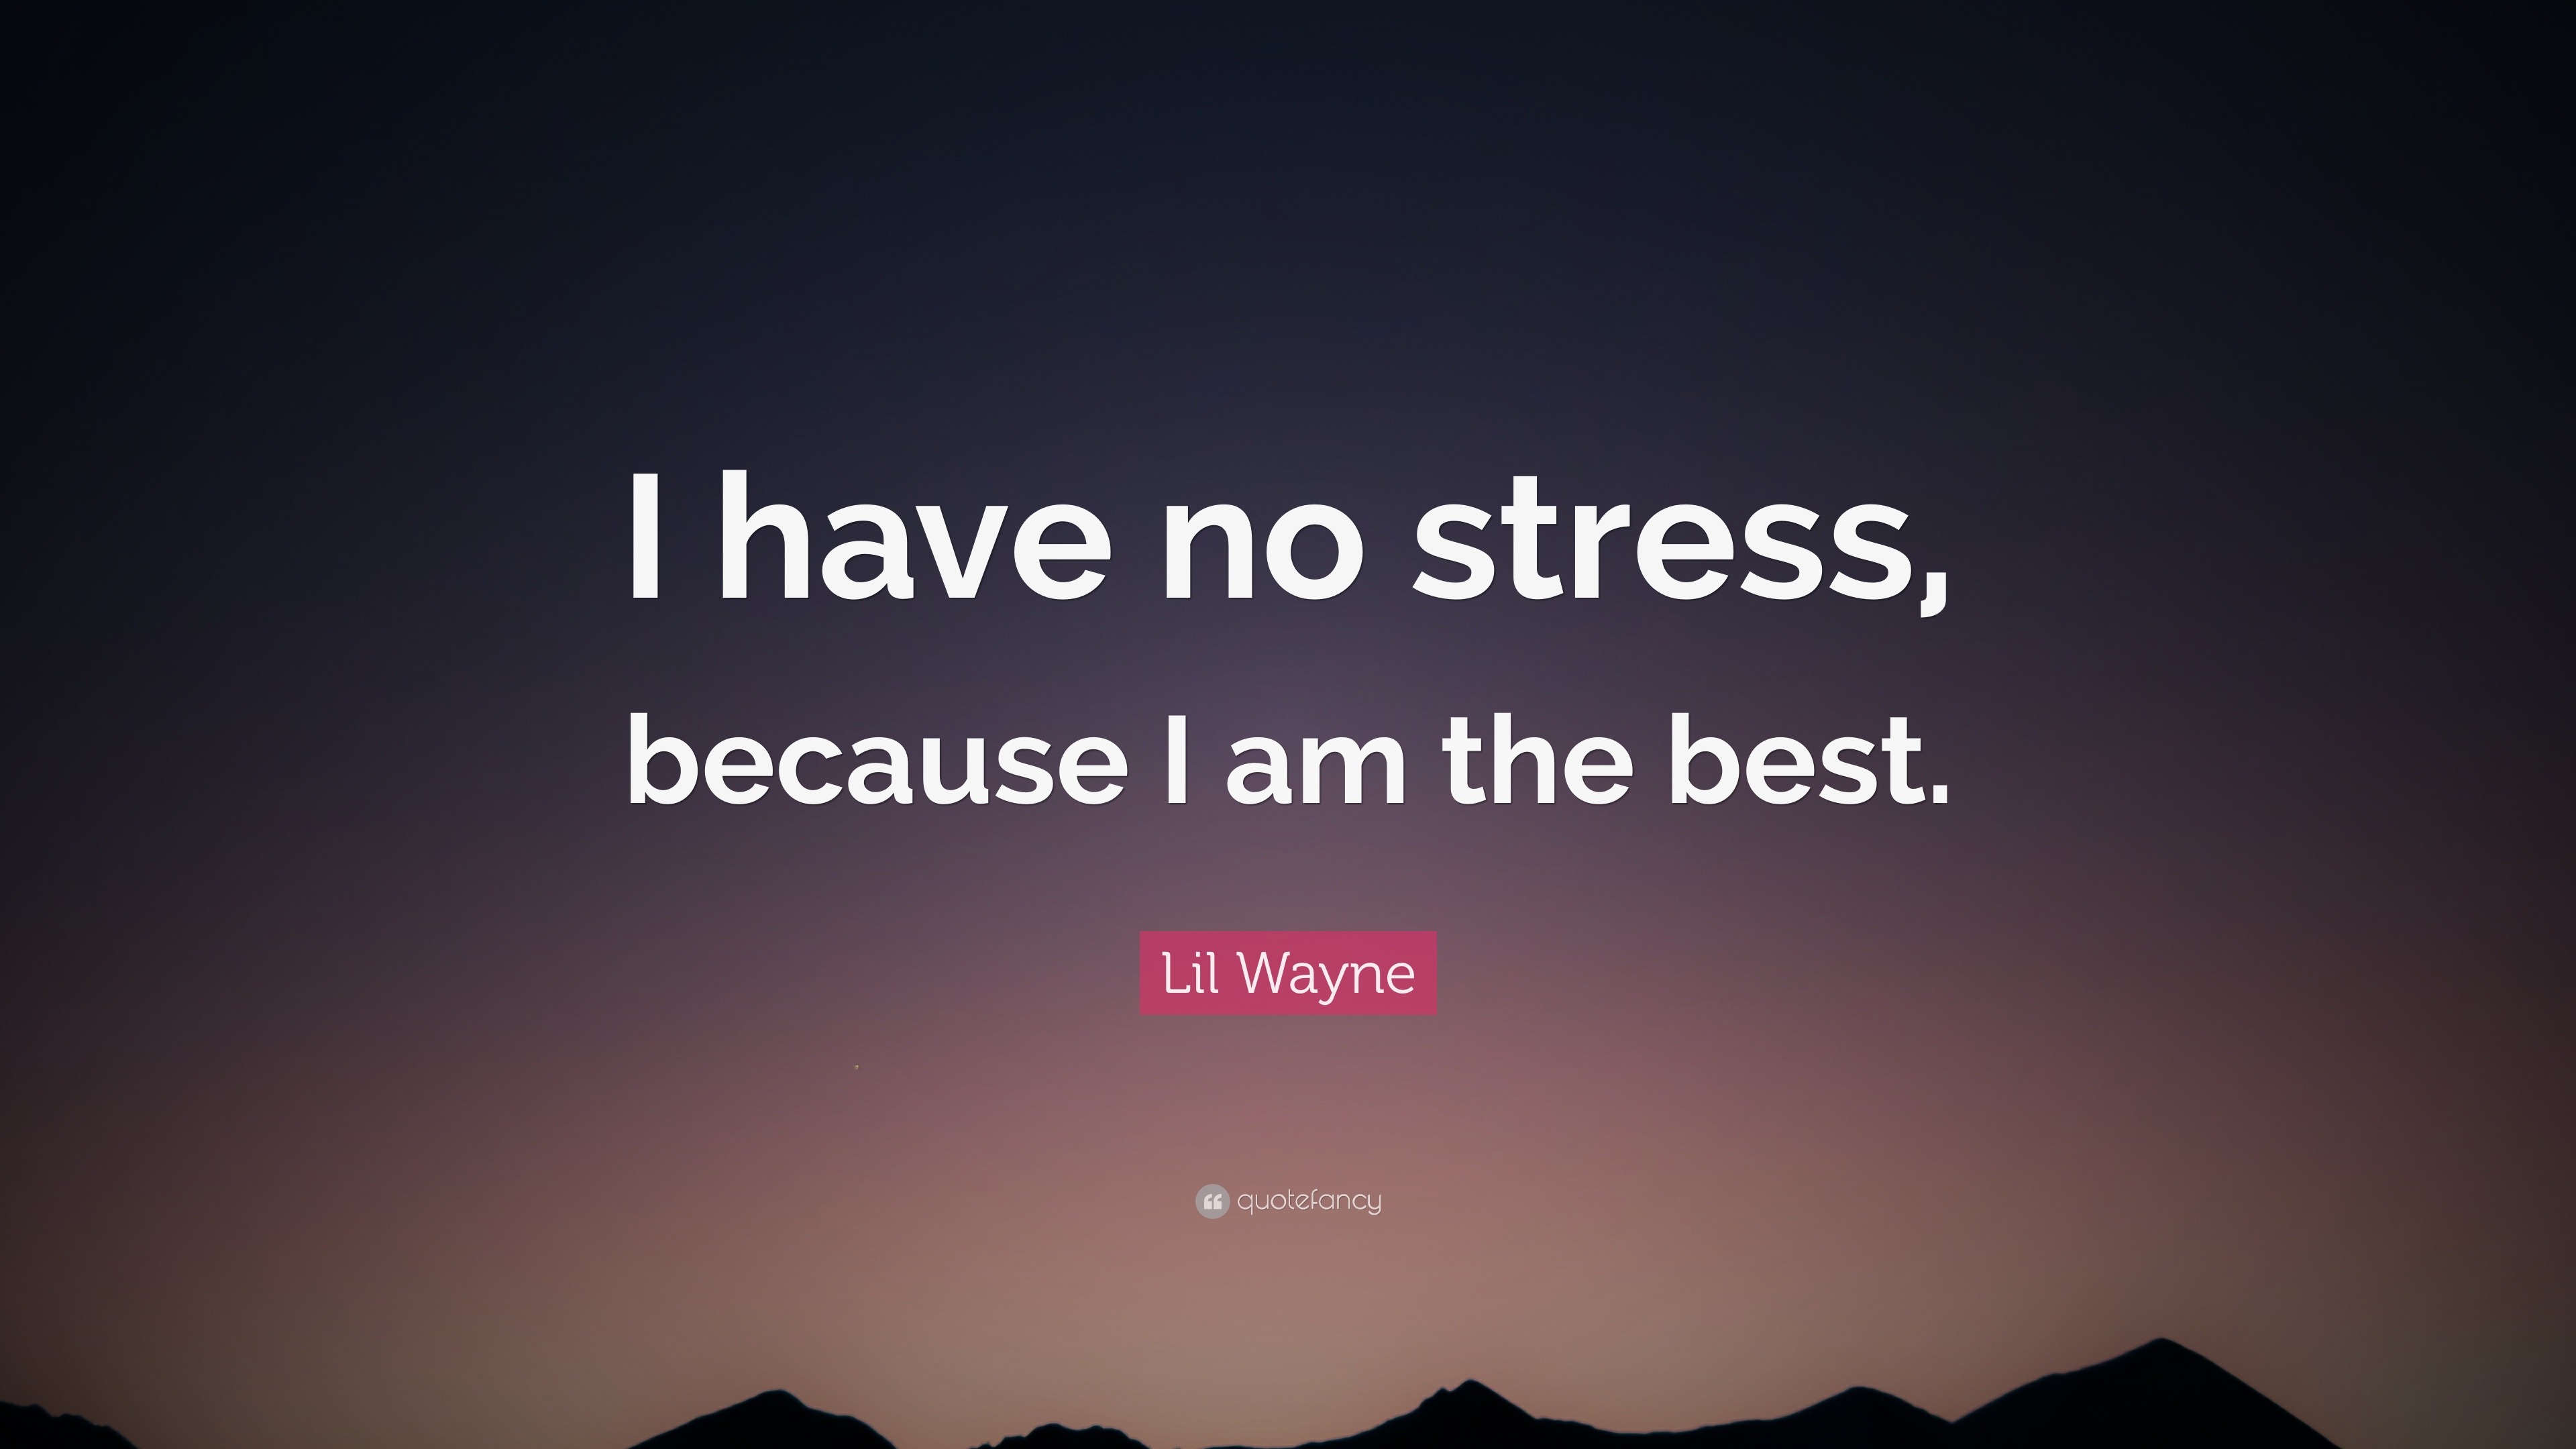 Lil Wayne Quote: “I have no stress, because I am the best.”